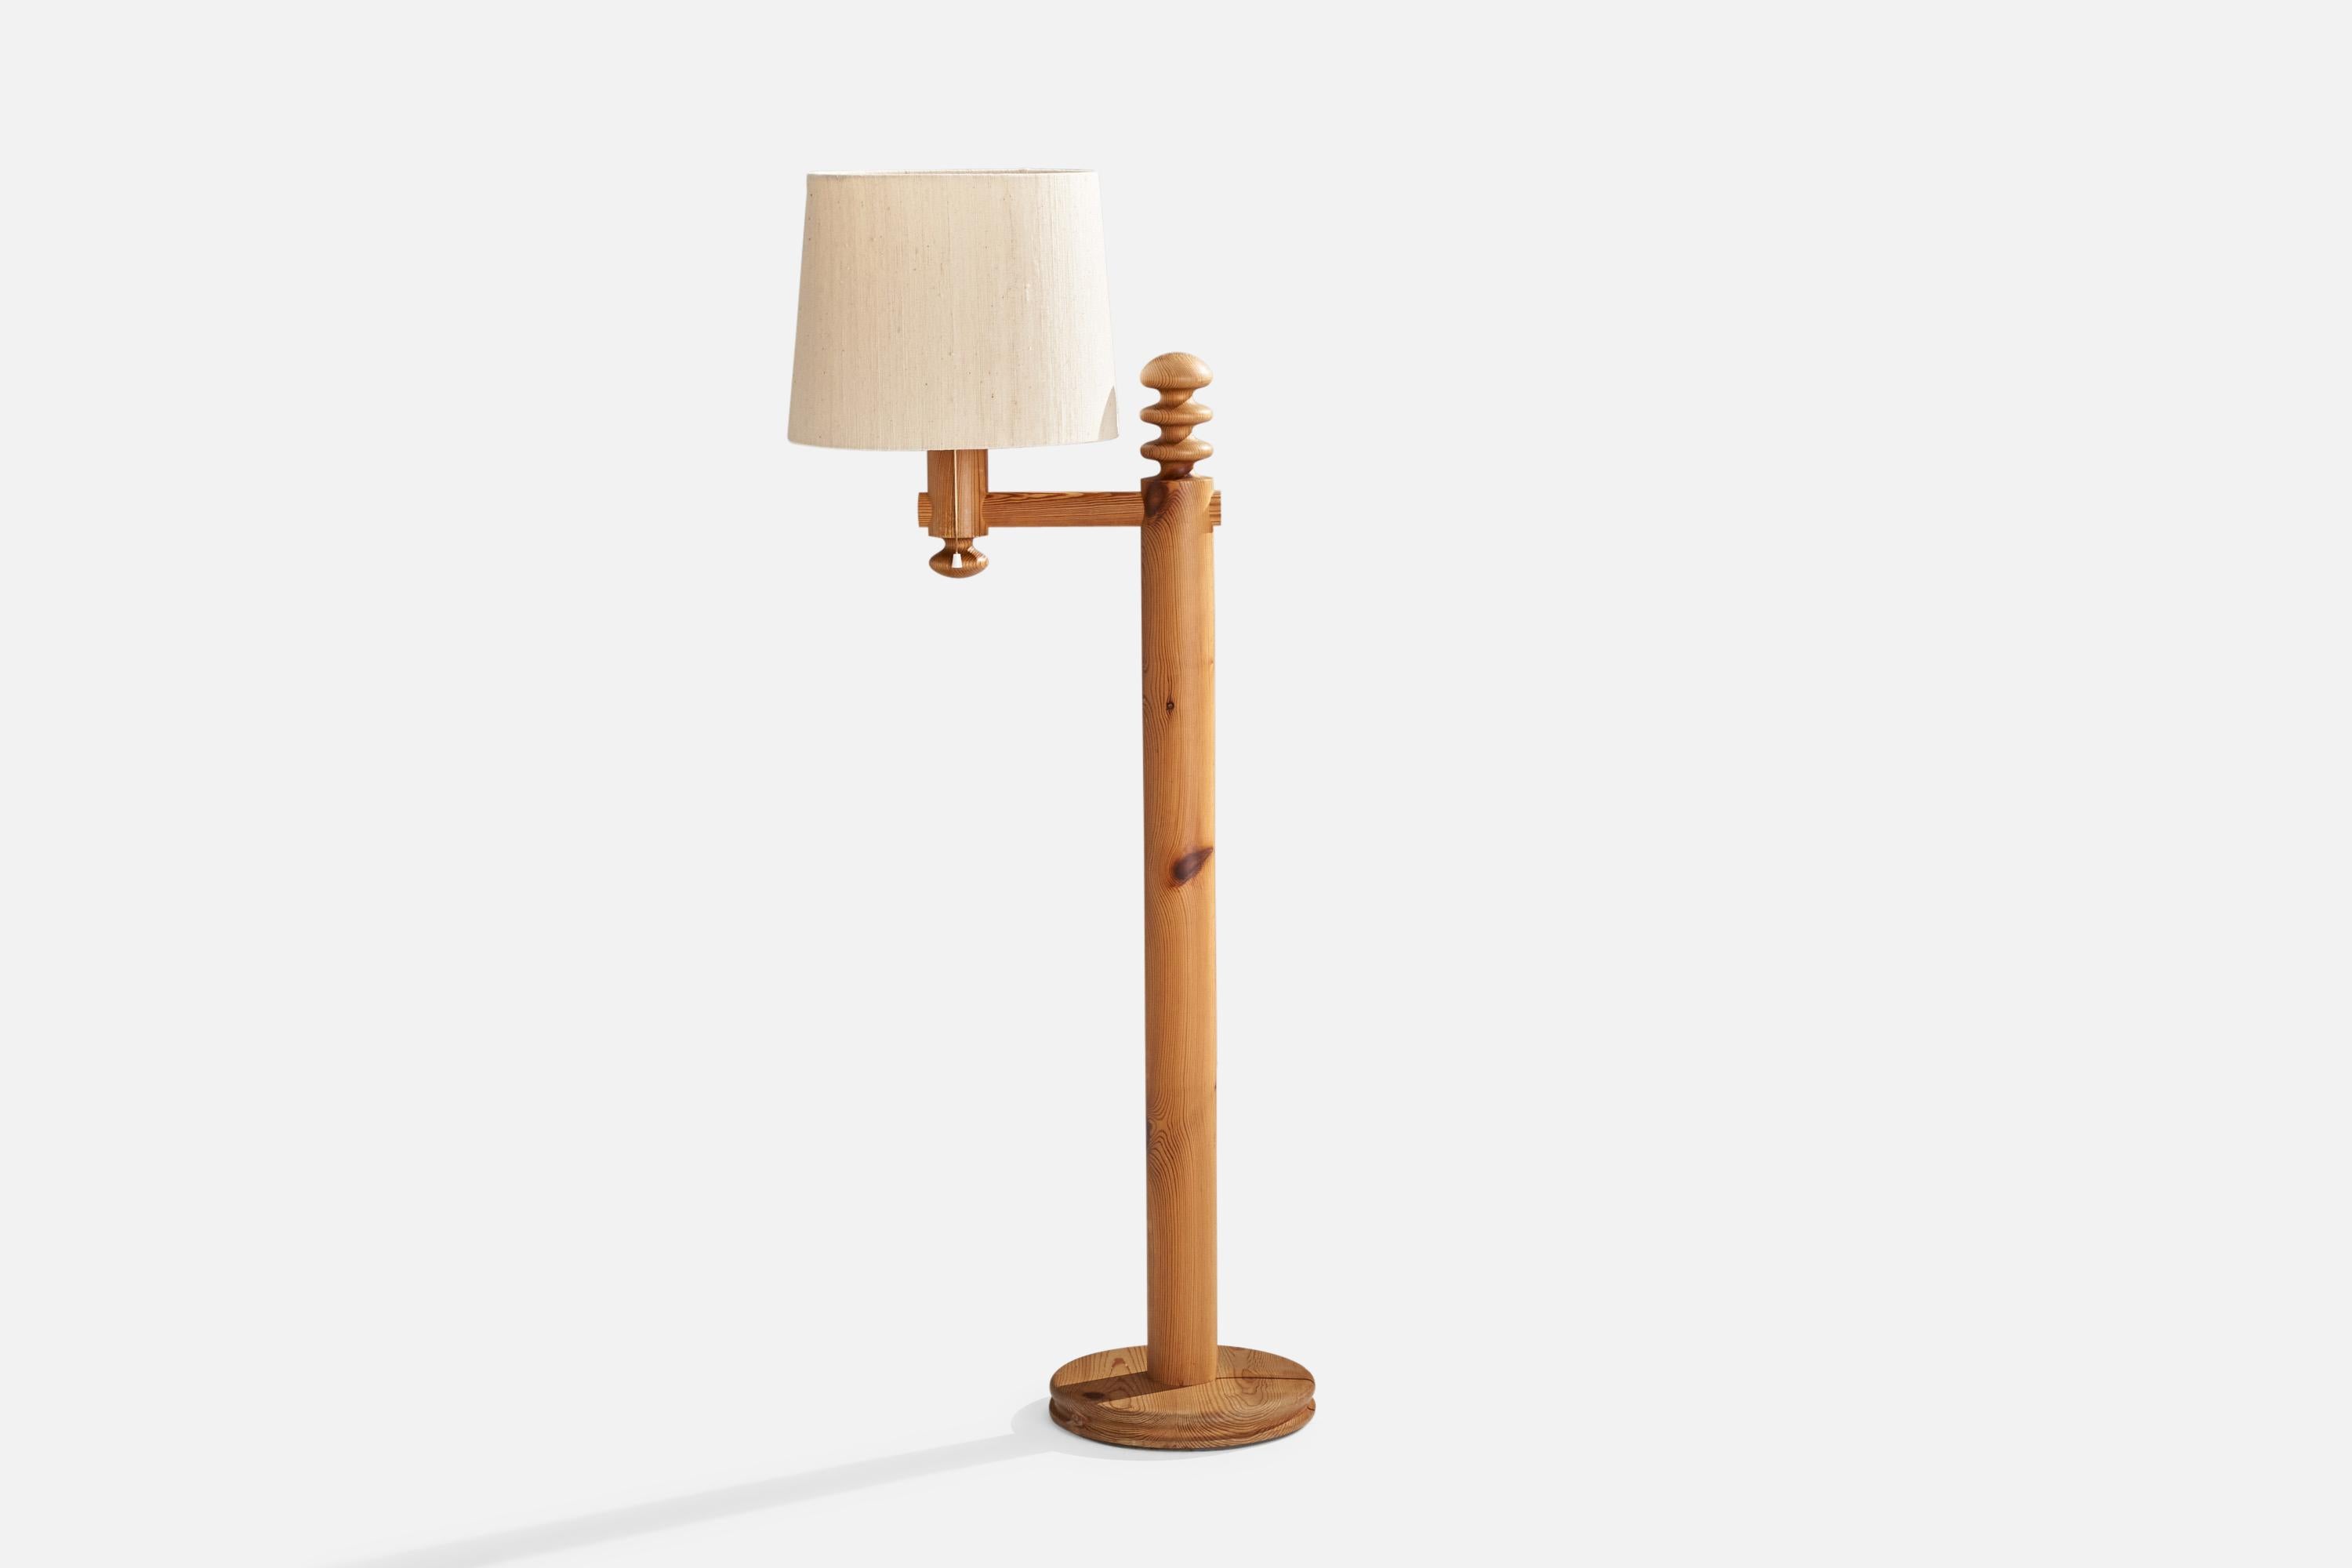 A pine and rattan floor lamp designed by Uno and Östen Kristiansson and produced by Luxus, Vittsjö, Sweden, 1970s.

Overall Dimensions (inches): 56.125” H x 14.75”W x 25.75” D
Stated dimensions include shade.
Bulb Specifications: E-26 Bulb
Number of